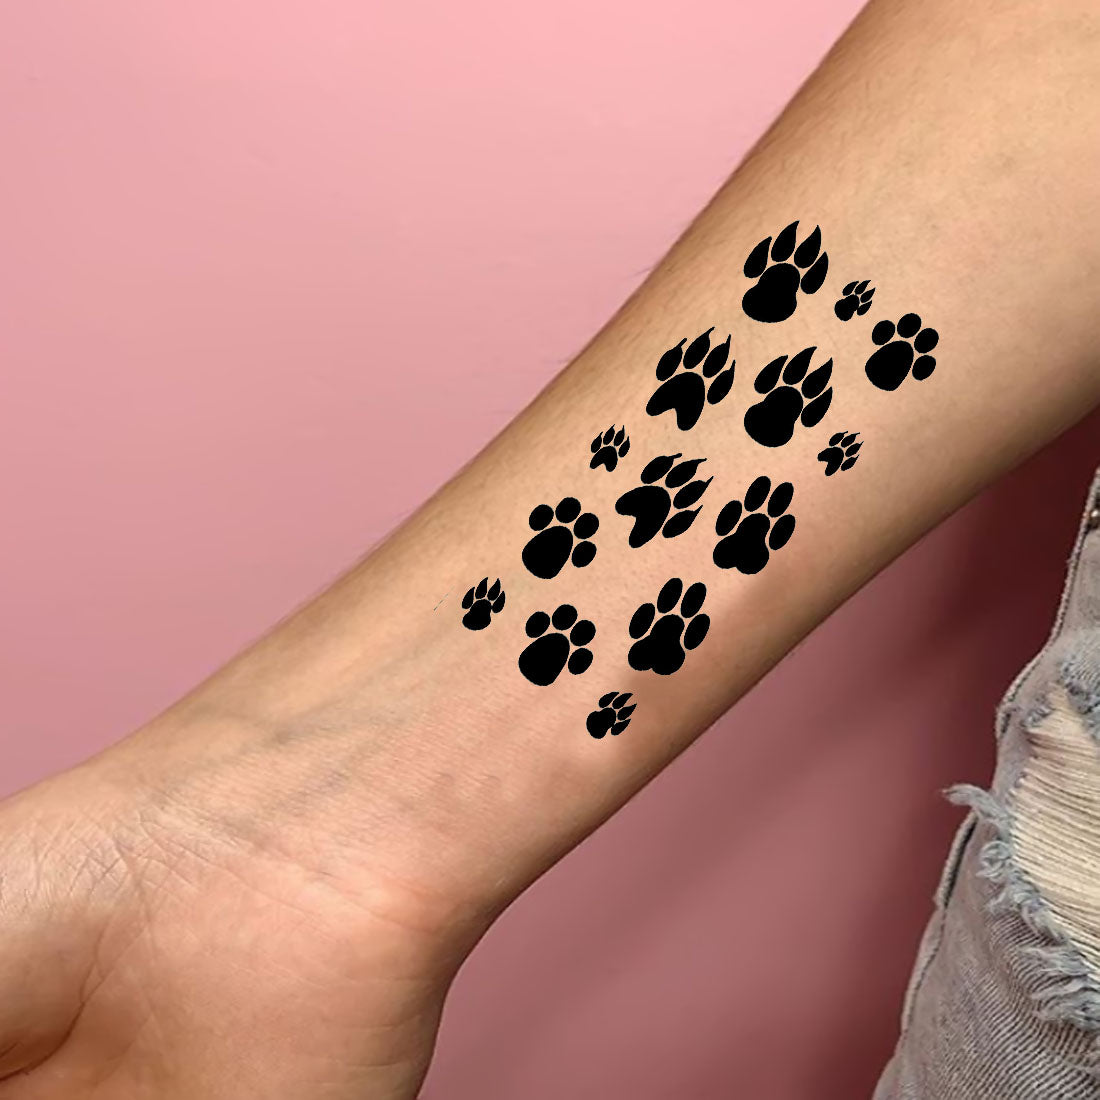 30 Cute Small & Simple Dog Tattoo Ideas for Women Animal Lovers | Dog  tattoos, Puppy tattoo, Tattoos for women small